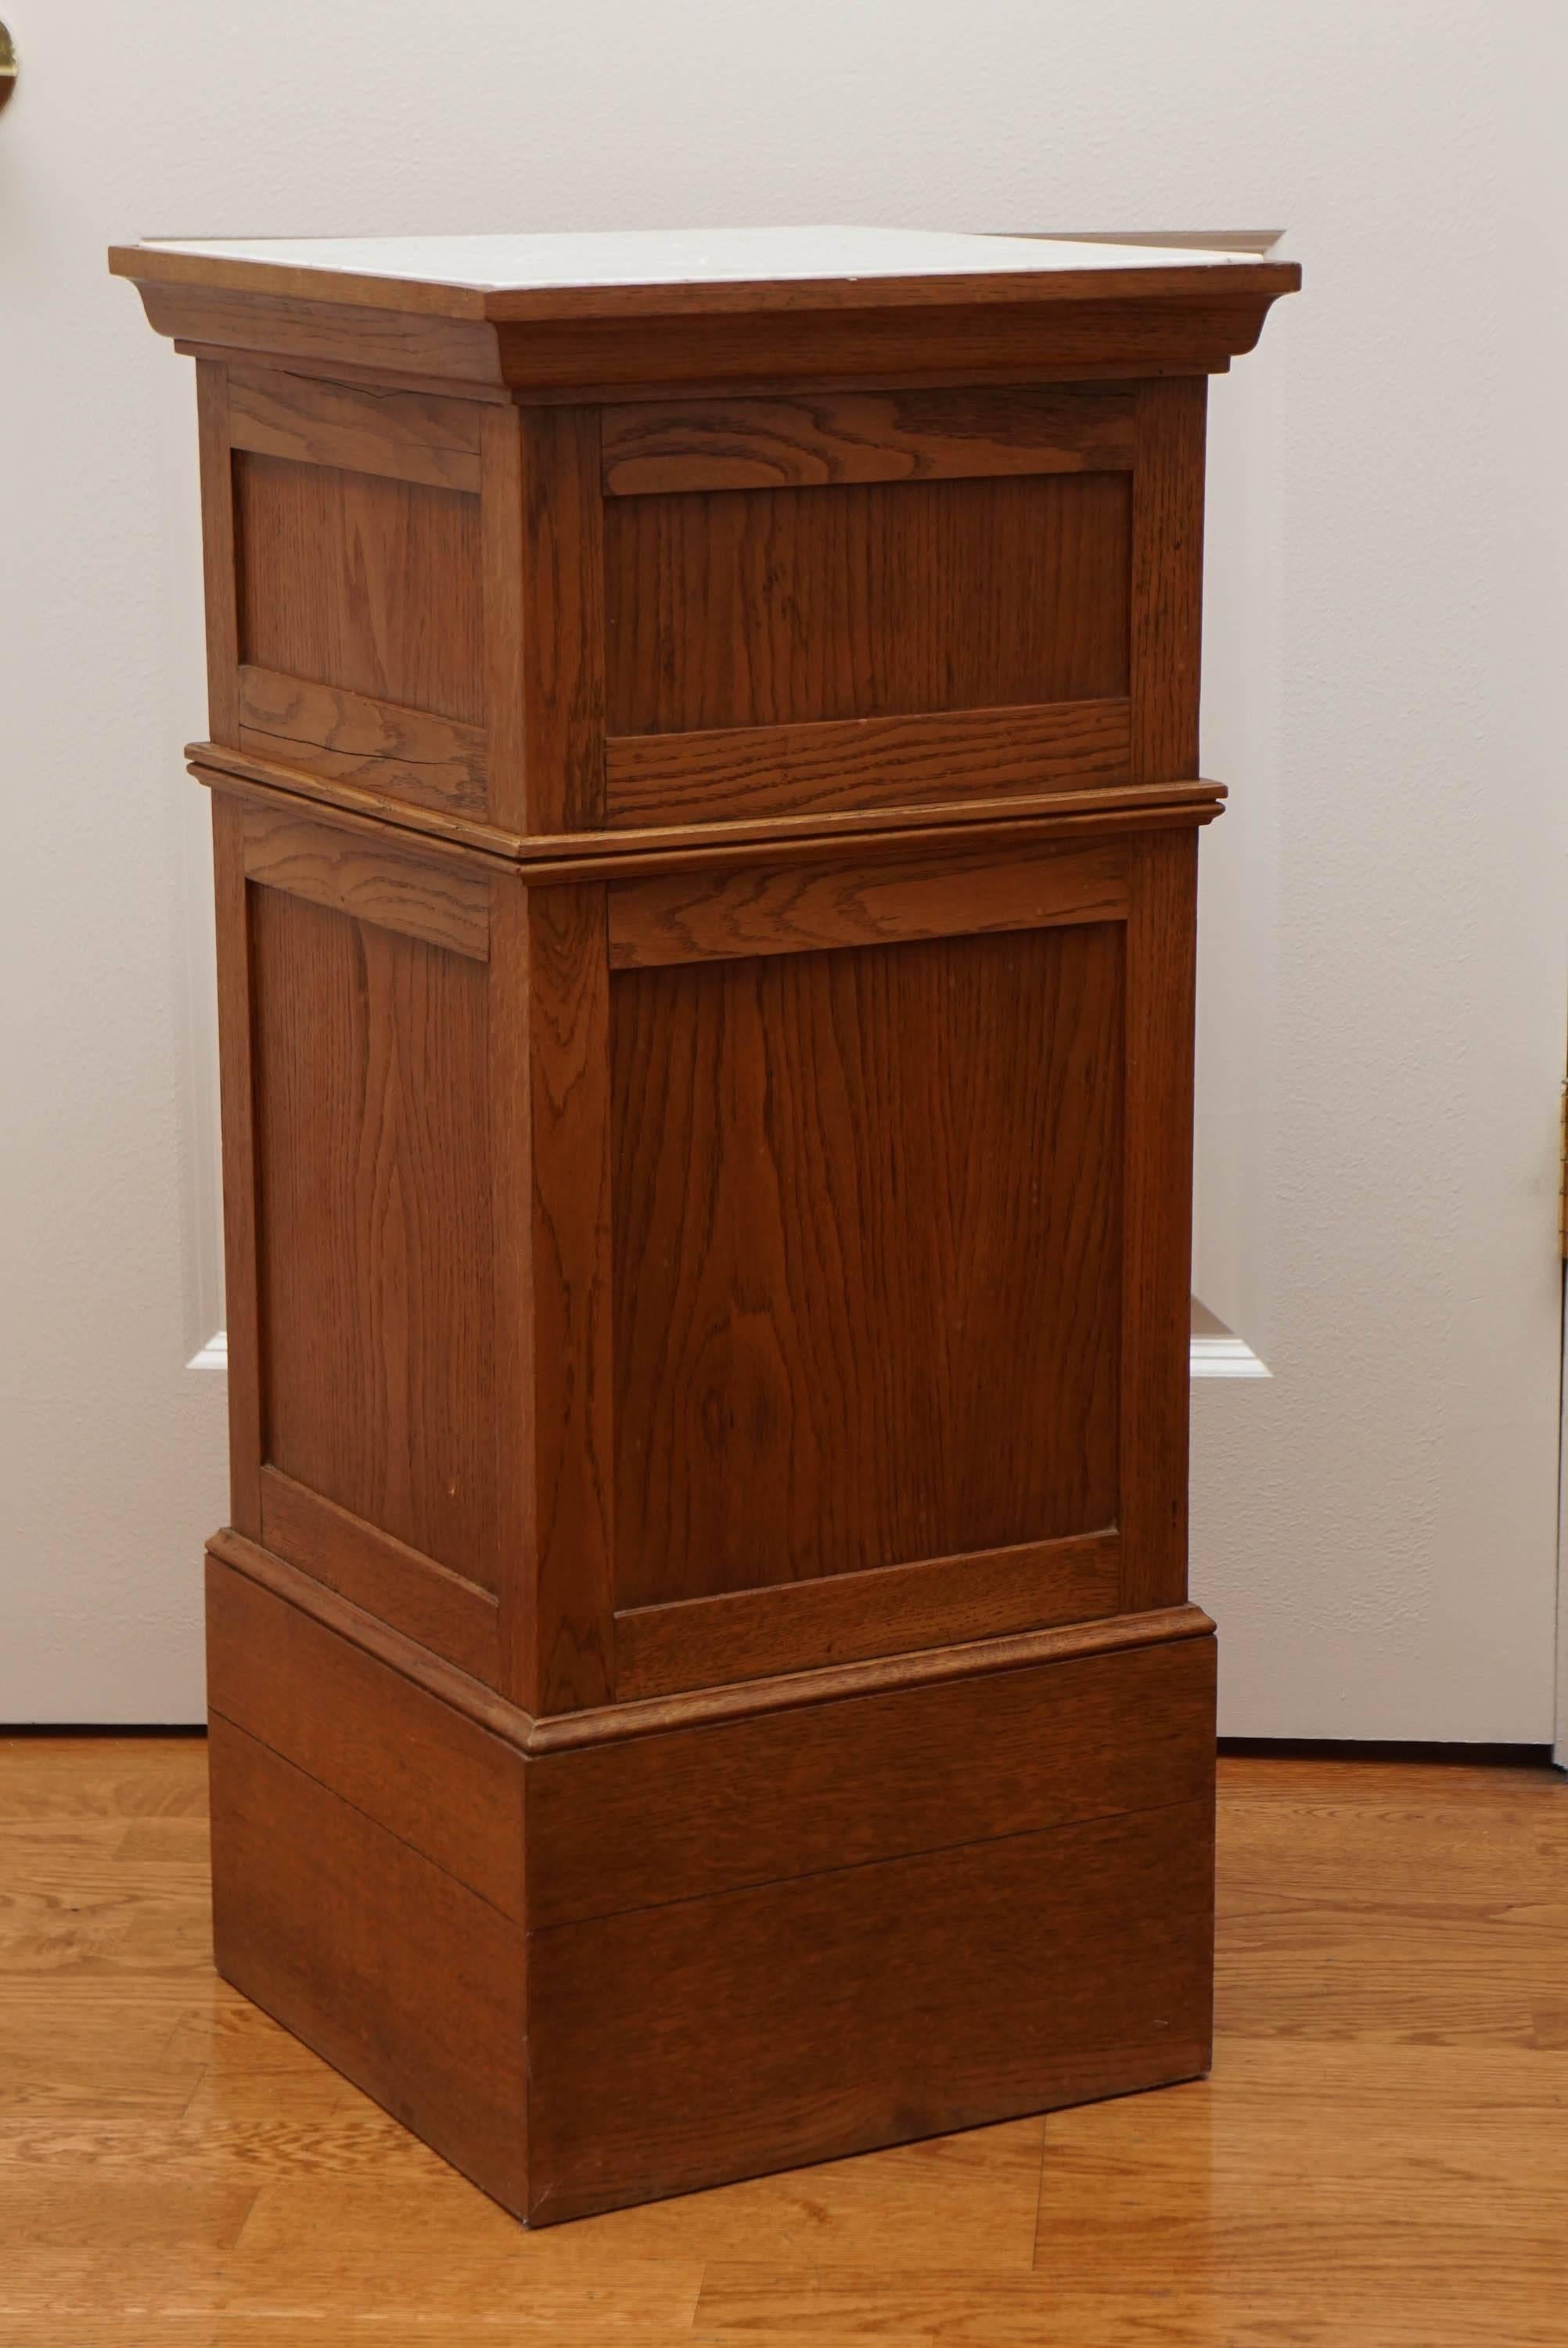 versatile, solid oak, vintage, pedestal stand with handsome, paneled sides and a marble top inset.